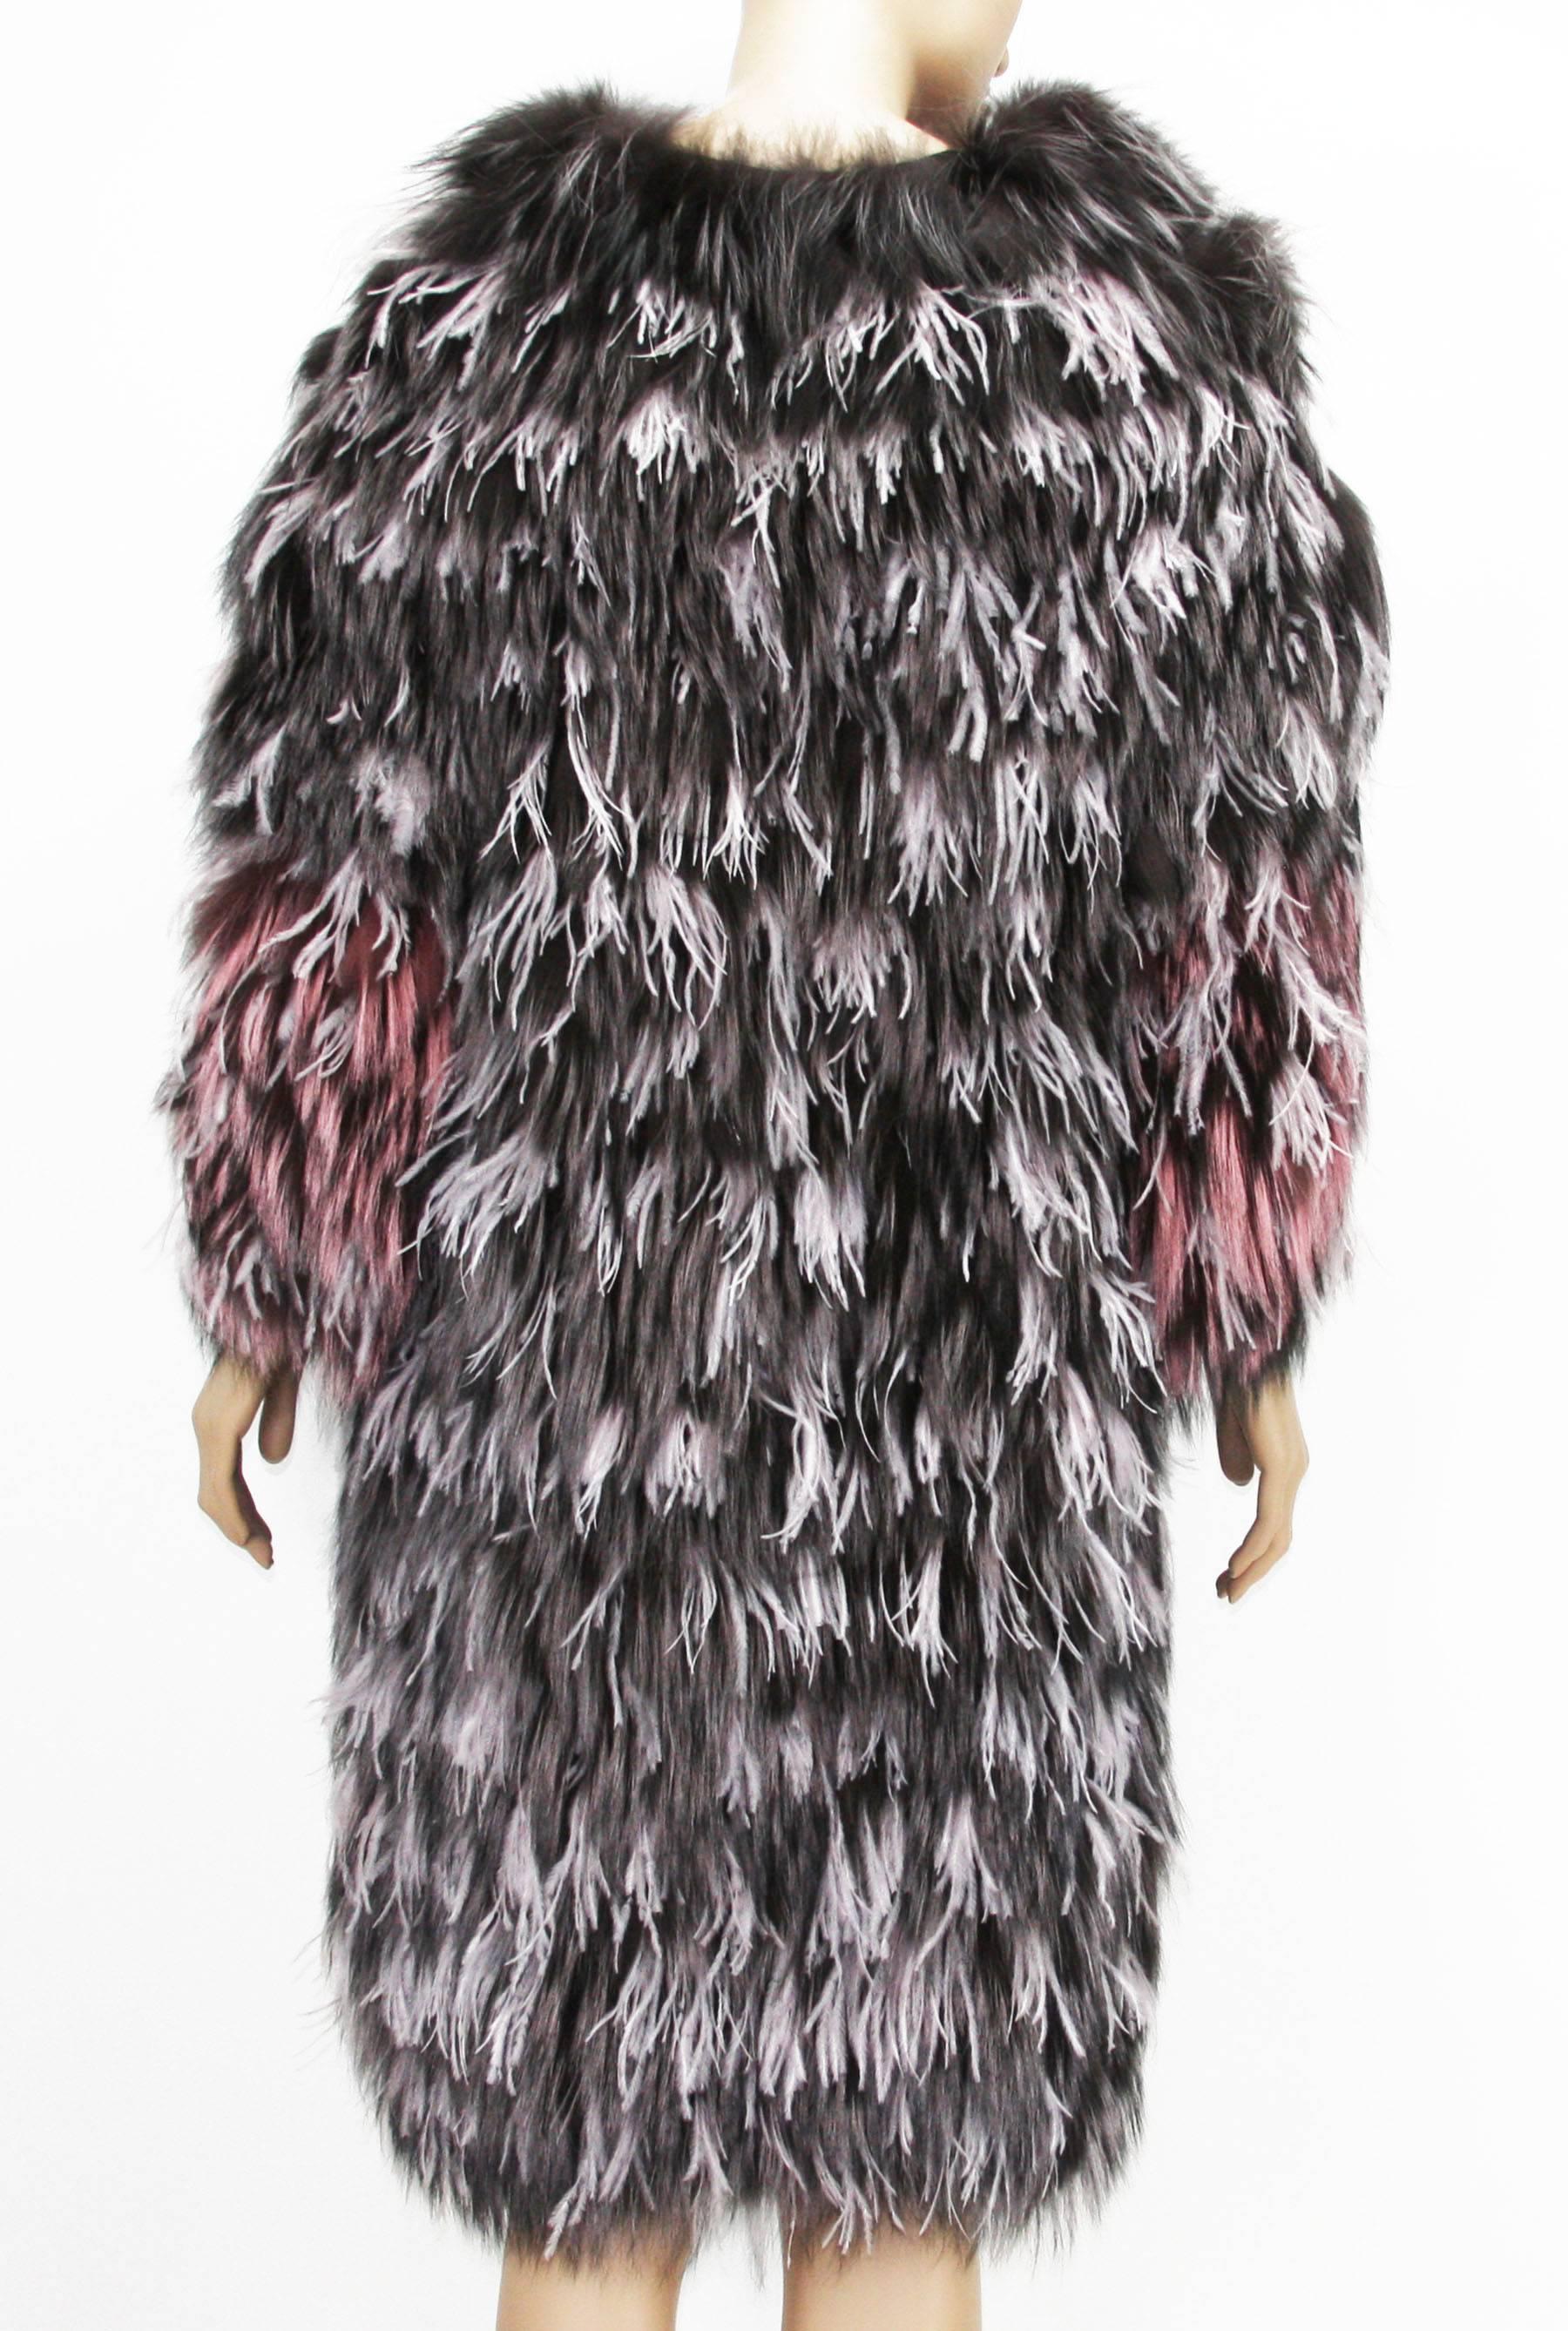 Oscar de la Renta Feathers and Fox Fur Evening Coat Jacket.
Black/Gray Fox fur, Soft Pink and Pink Ostrich Feathers.
Very light evening coat. Hook-and-eye closure, dual slit pockets, fully lined.
Measurements: Length - 40 inches, Bust - up to